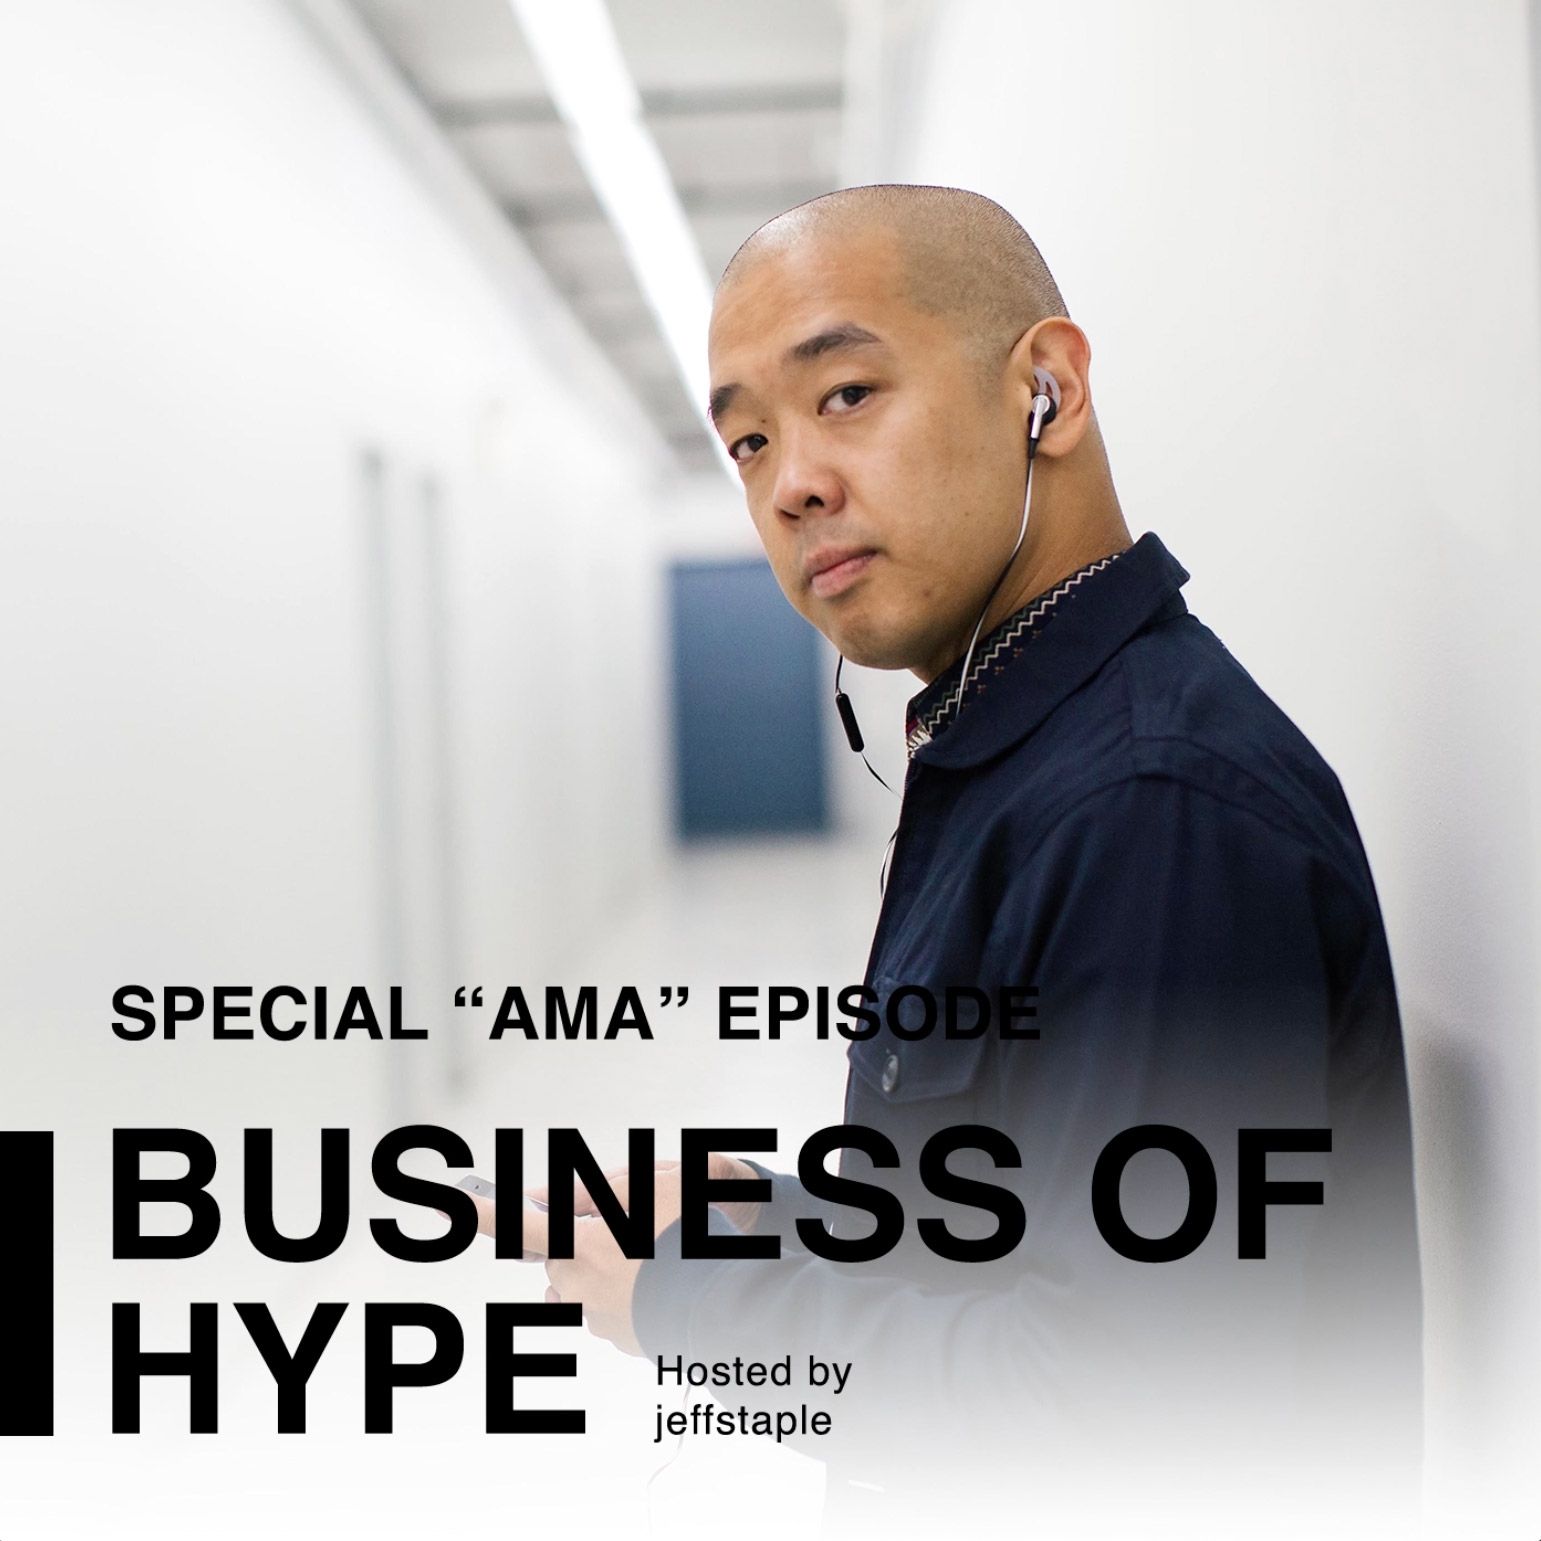 jeffstaple: Ask Me Anything Episode